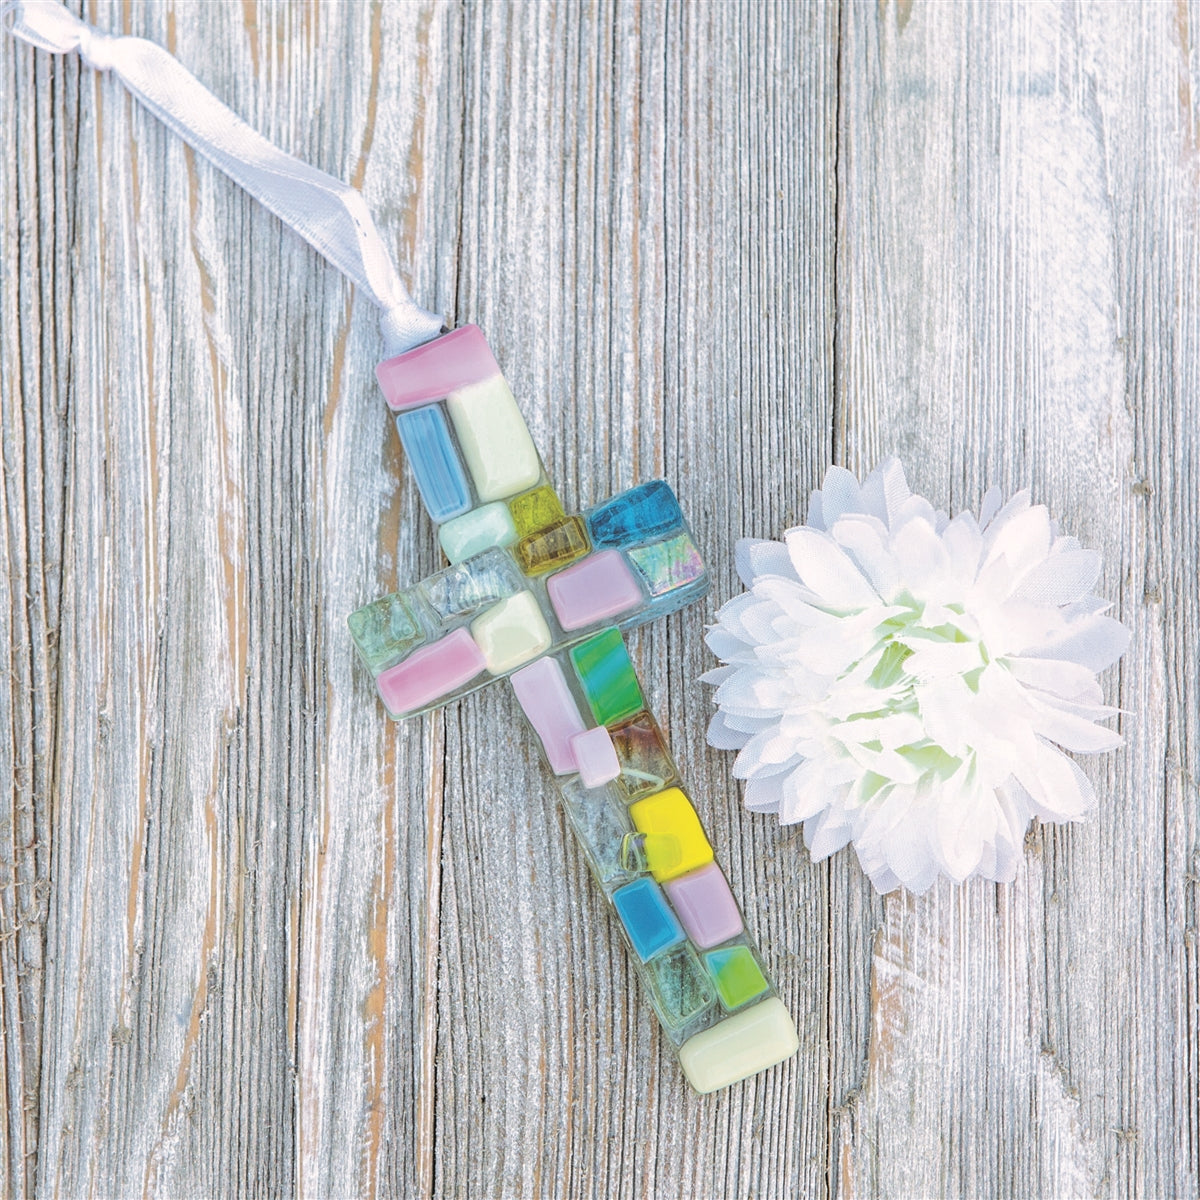 Pastel glass mosaic cross with white satin ribbon for hanging.